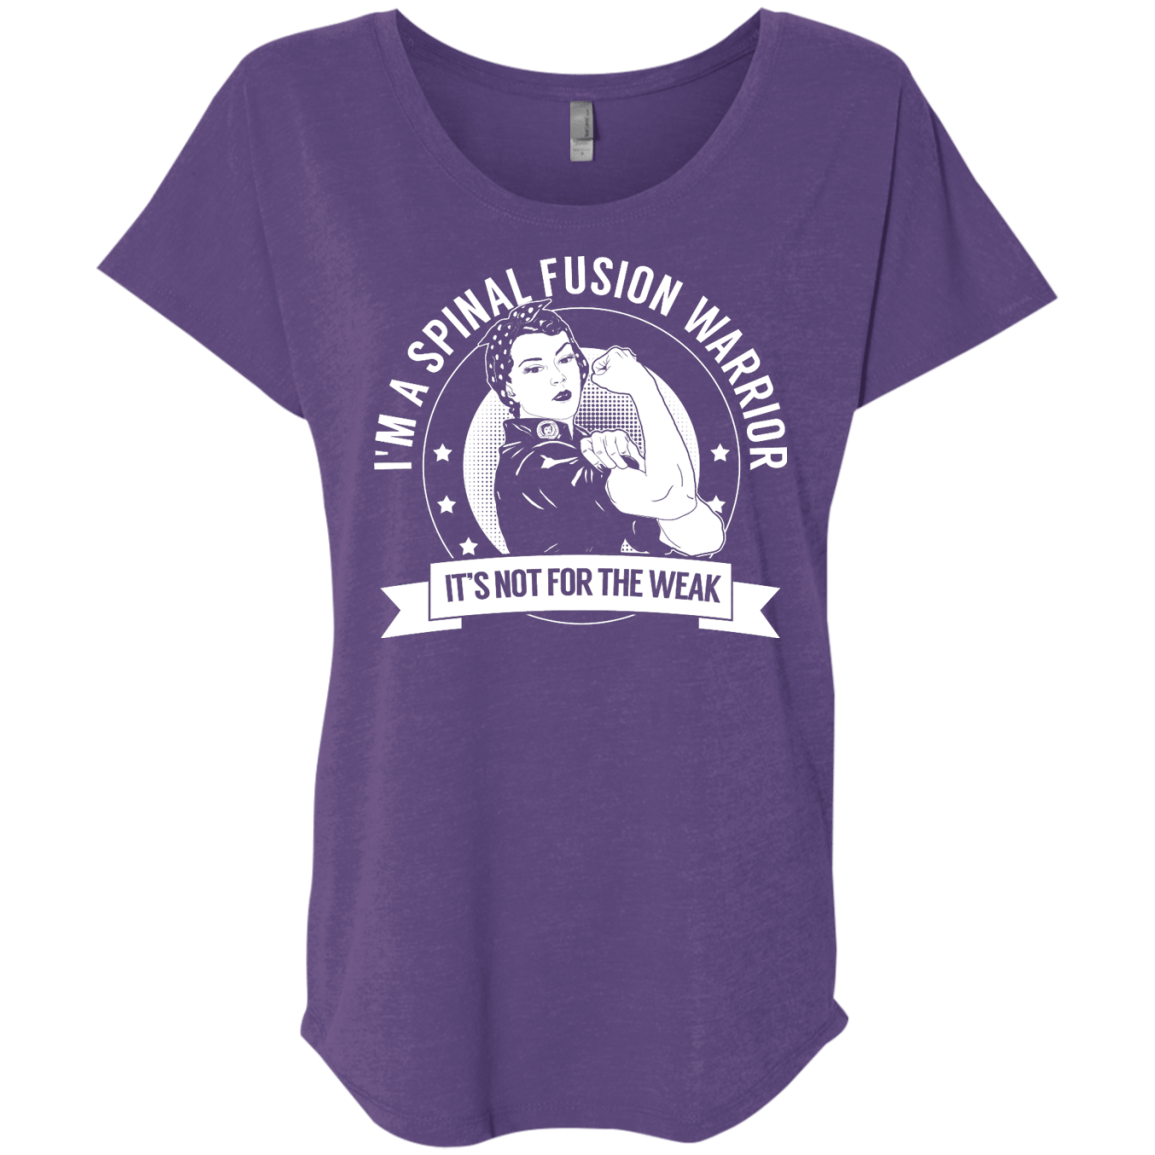 Spinal Fusion Warrior Not For The Weak Dolman Sleeve - The Unchargeables